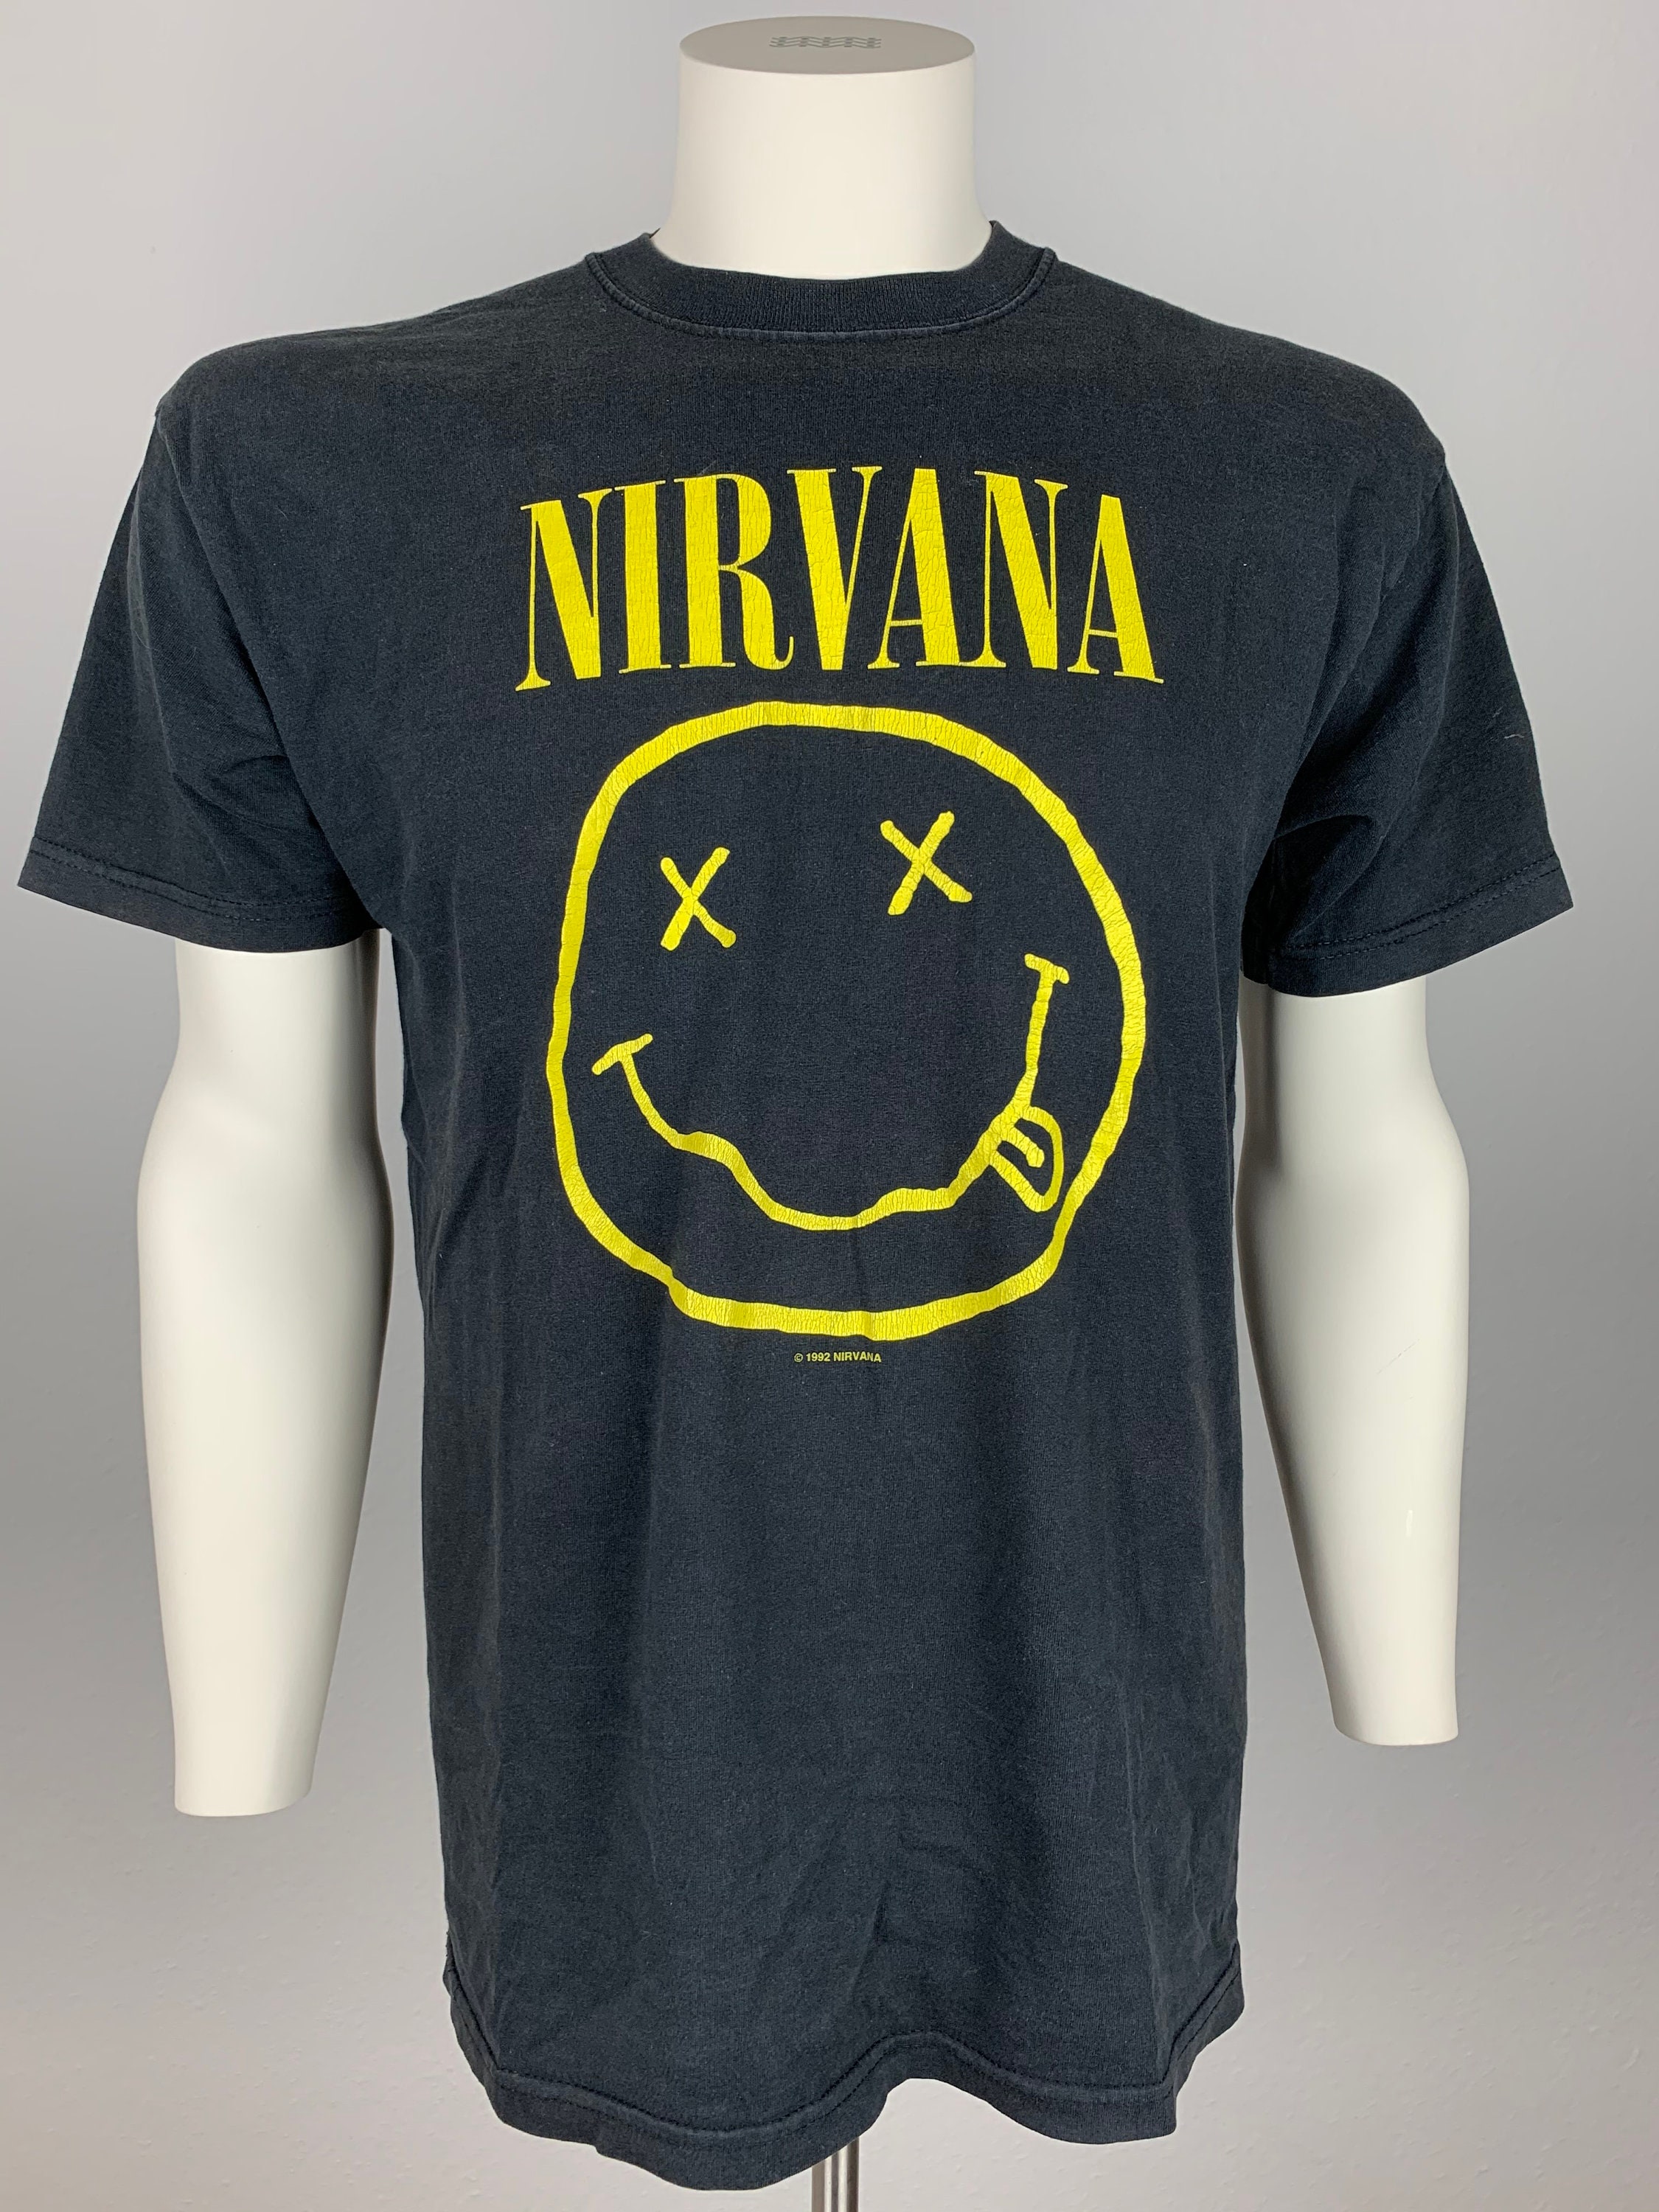 NIRVANA 1992 T-shirt Vintage / Smiley Face / Flower Sniffin / Kitty ...